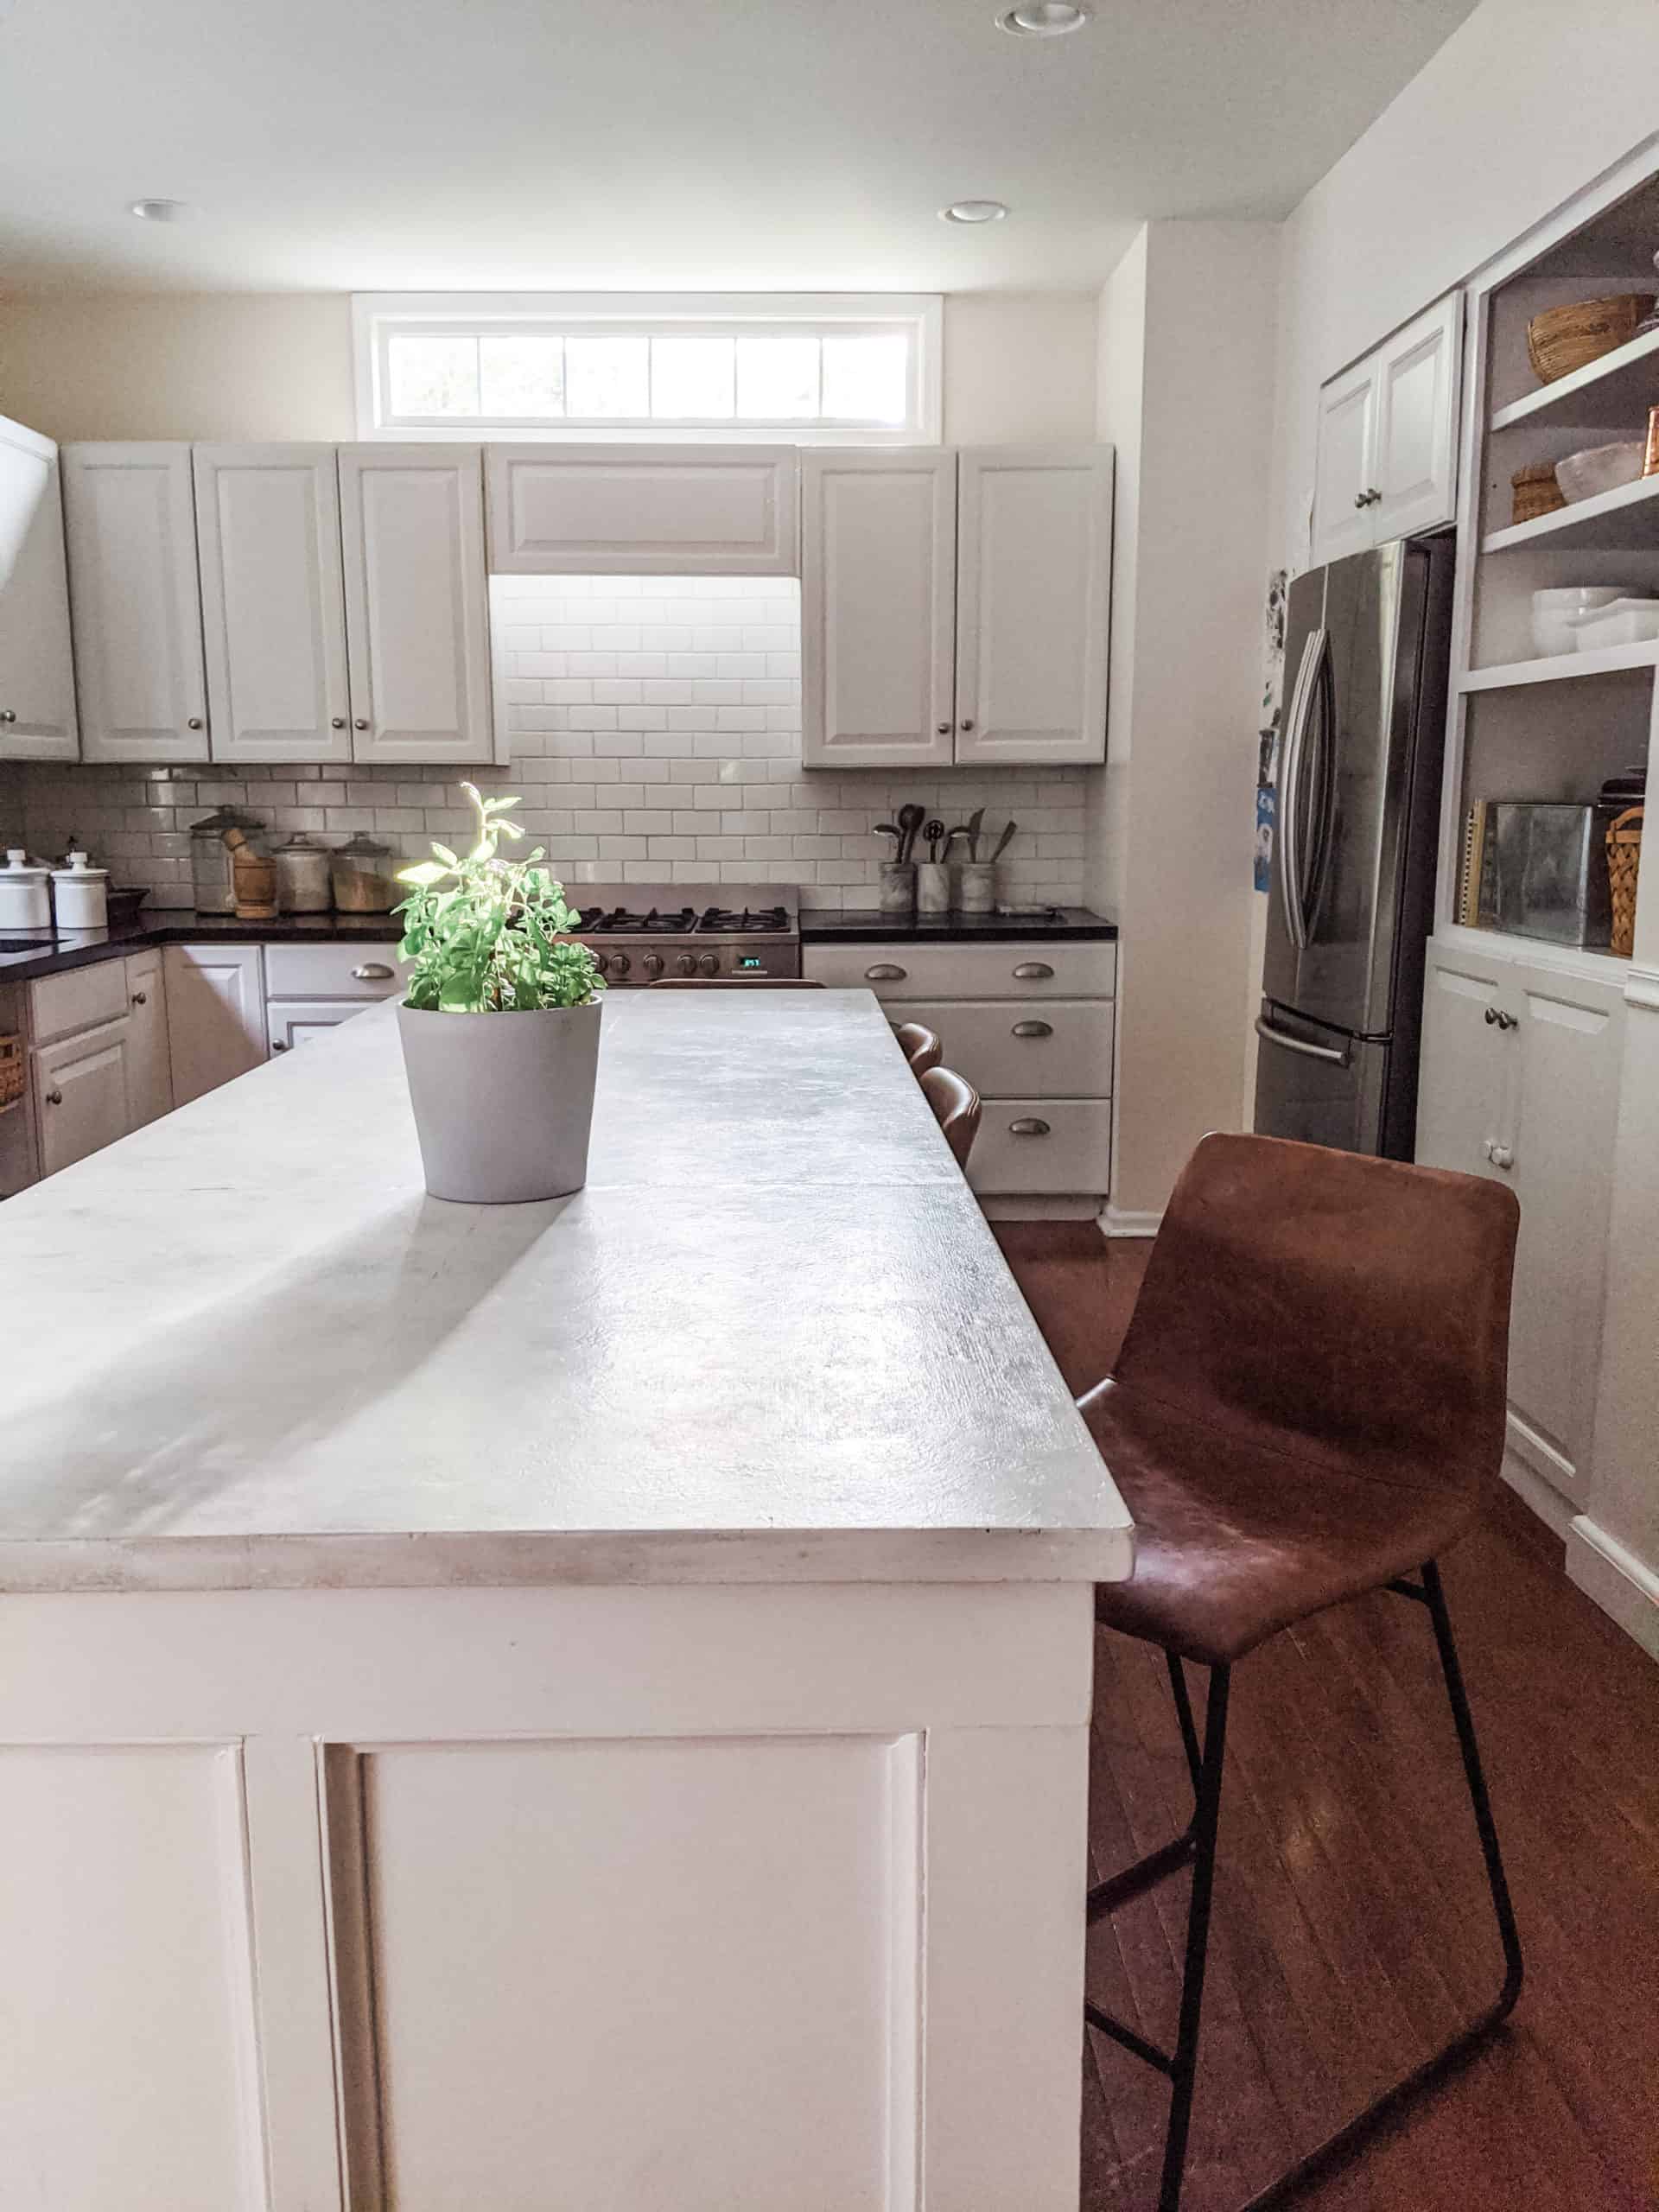 A traditional, large white kitchen island 